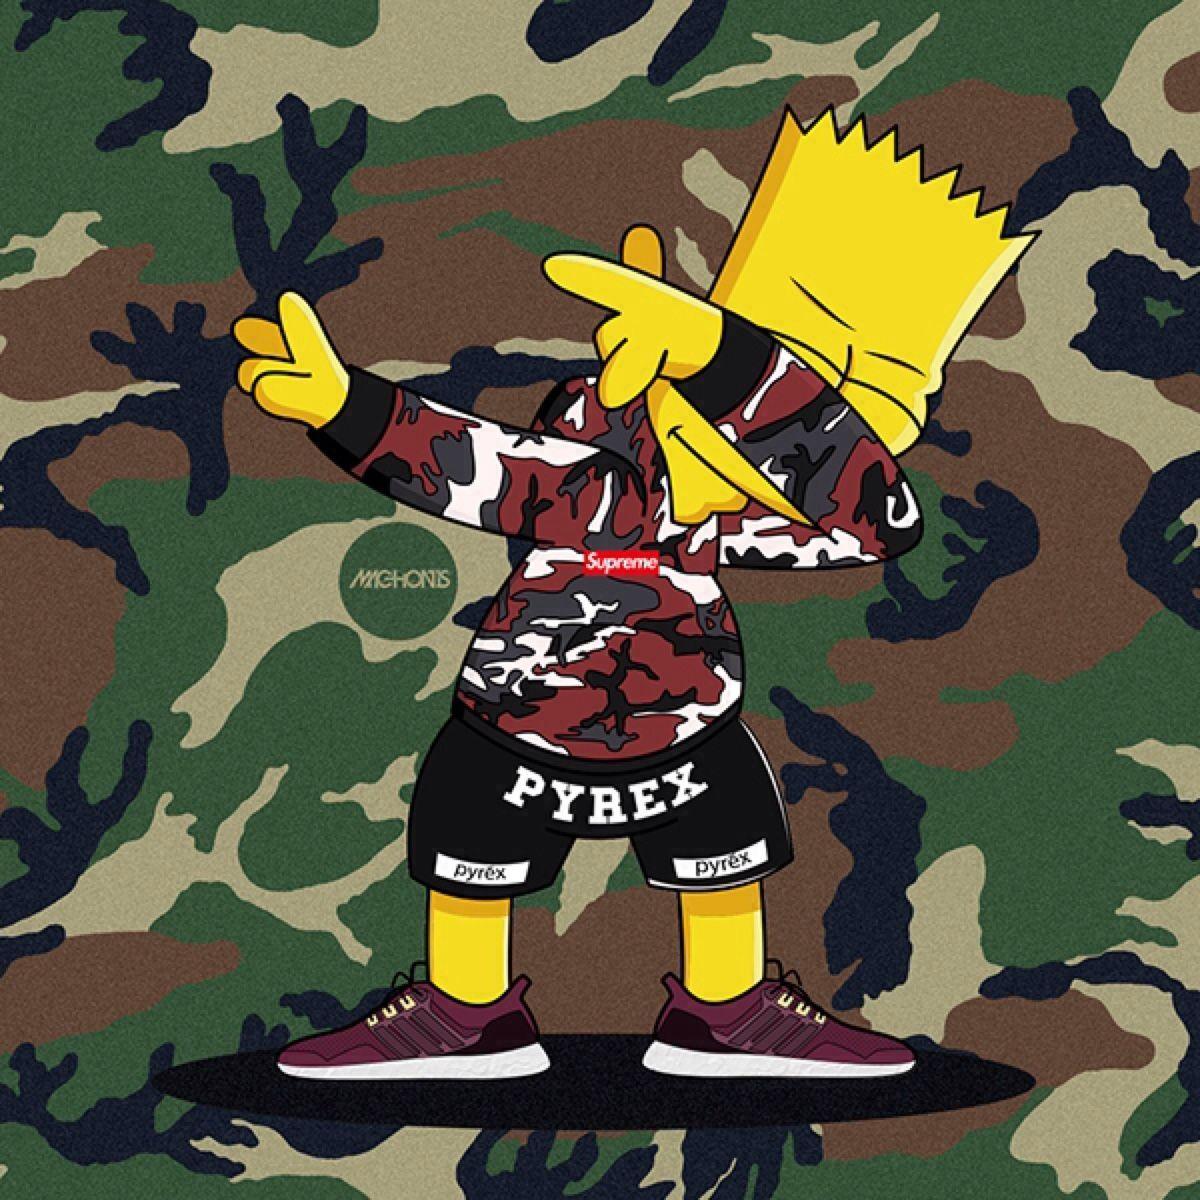 Bart #Supreme. The Simpson. Simpsons characters